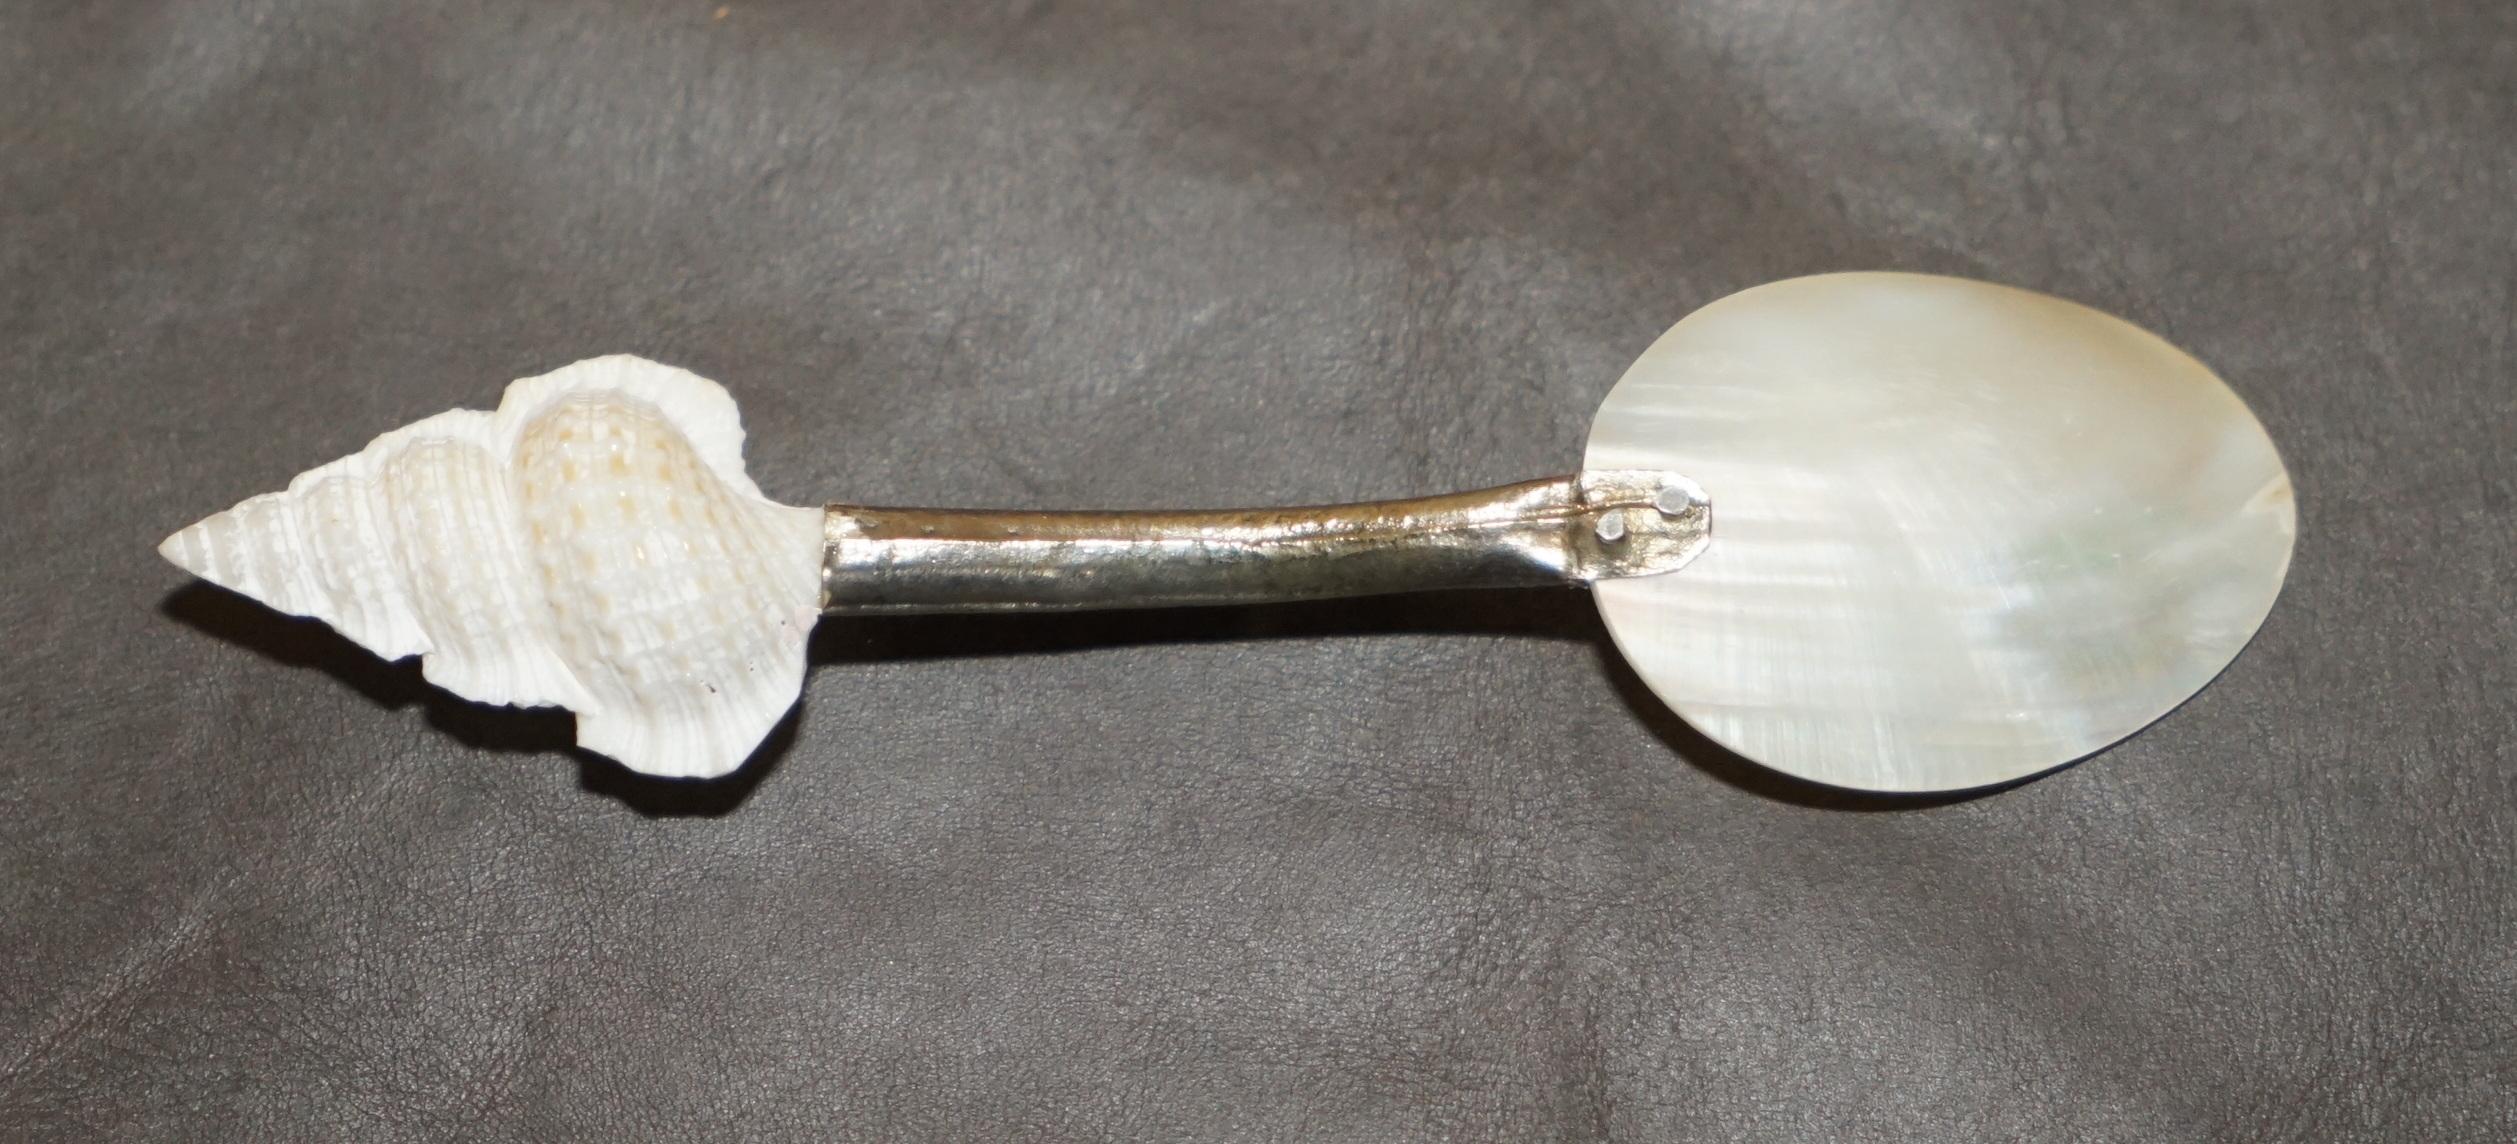 OUR MOUR ViCtorian MOTHER OF PEARL & STERLING SILVER TESTED SHELL TEA SPOONS en vente 8